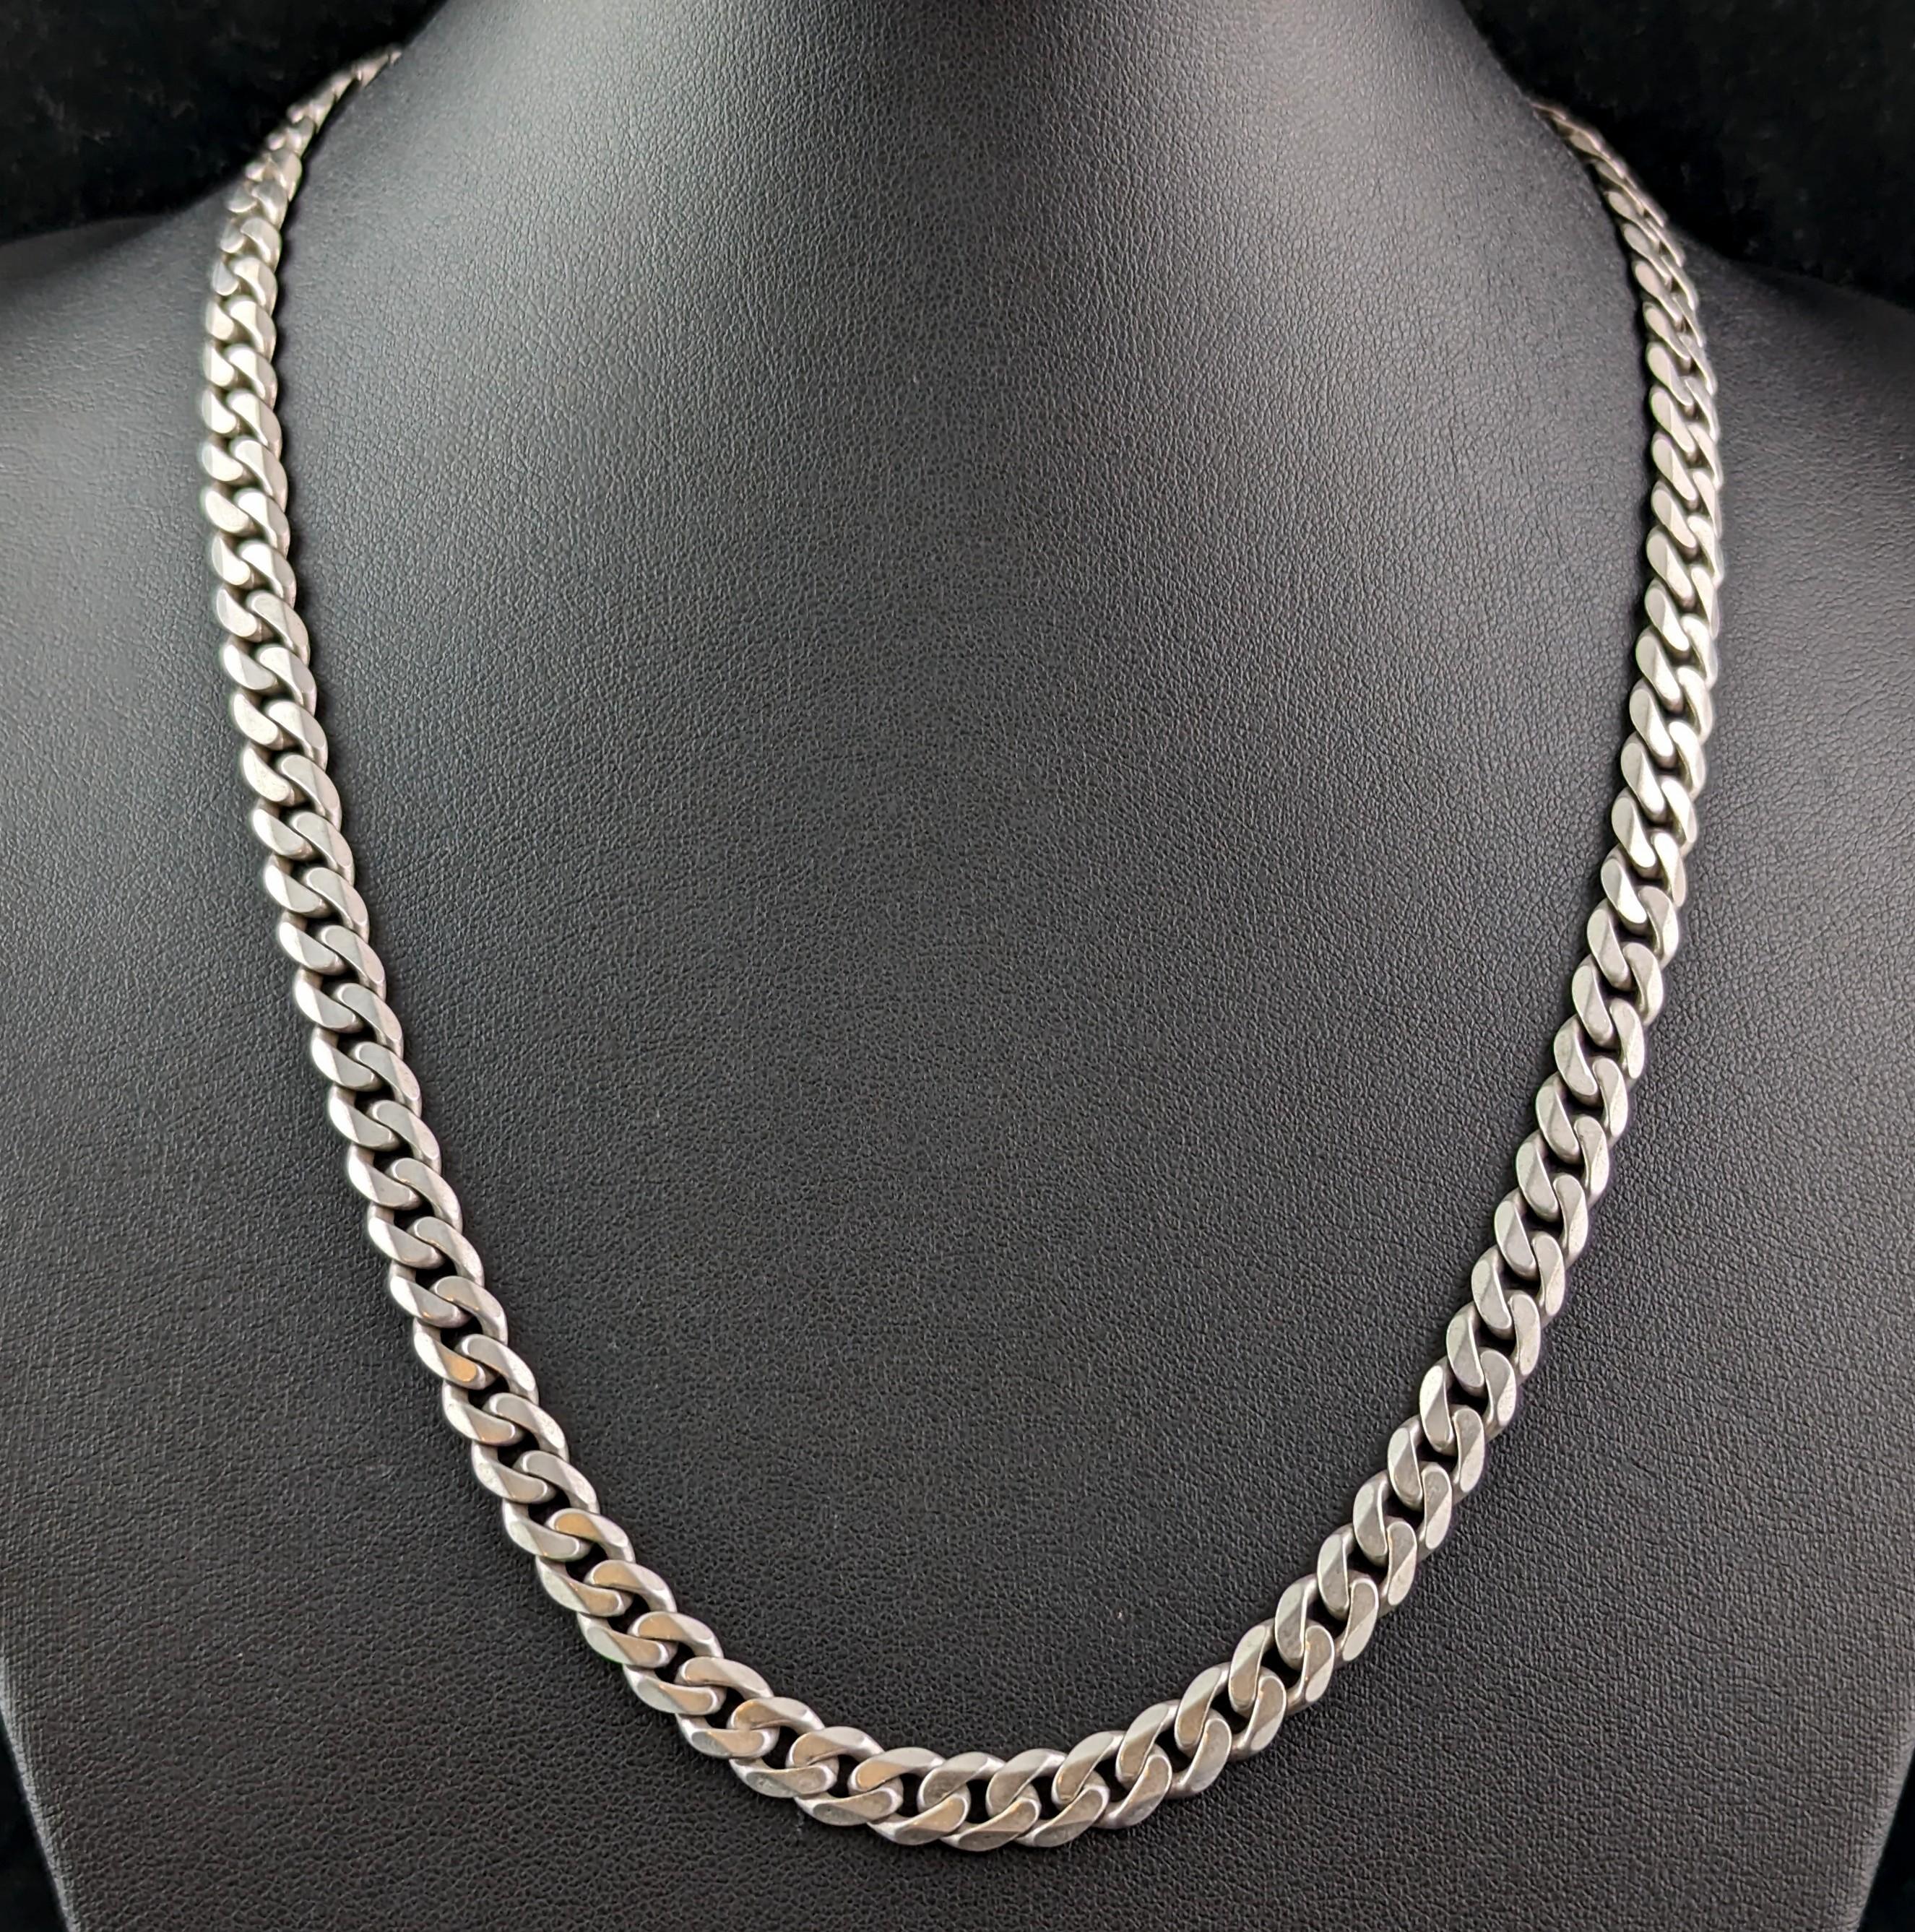 A lovely vintage sterling silver flat curb link chain necklace.

Crisp flat curb links really make this chain stand out whilst at the same time making it incredibly easy and comfortable to wear.

It is a great length at 20